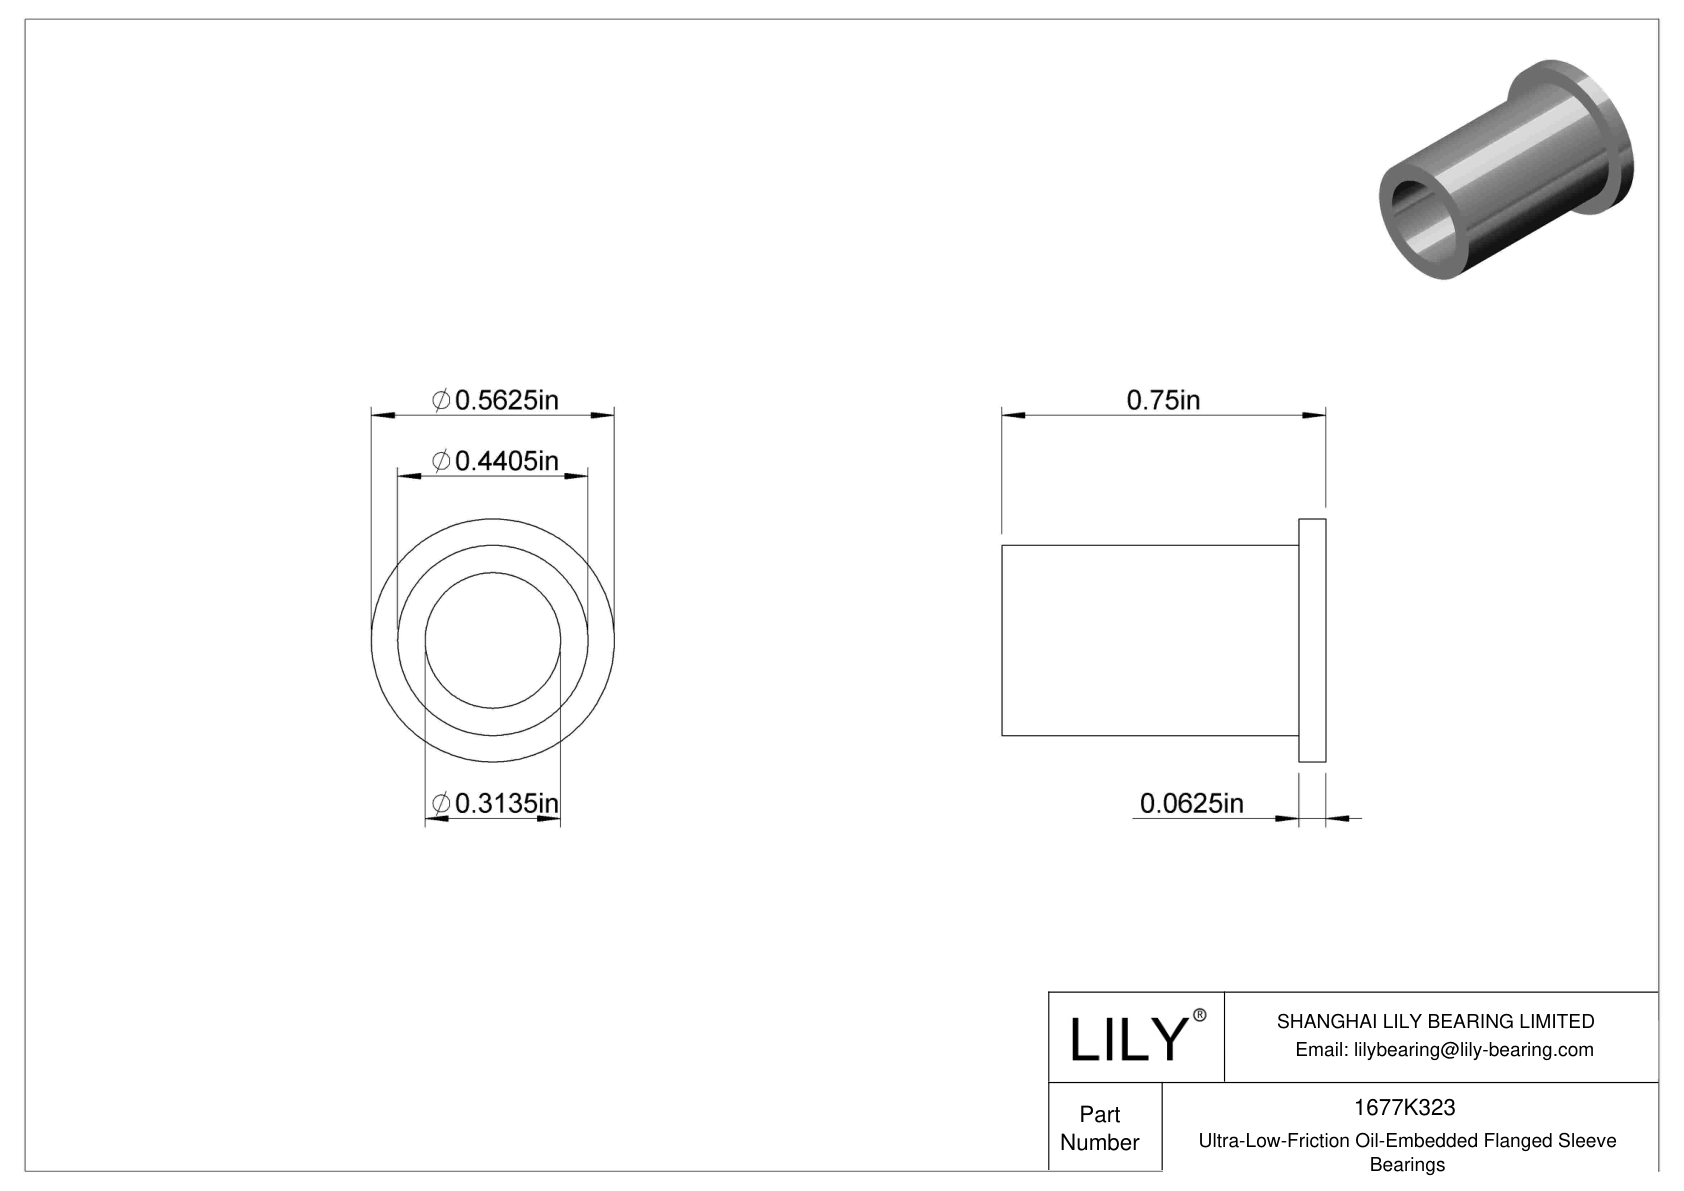 BGHHKDCD Ultra-Low-Friction Oil-Embedded Flanged Sleeve Bearings cad drawing